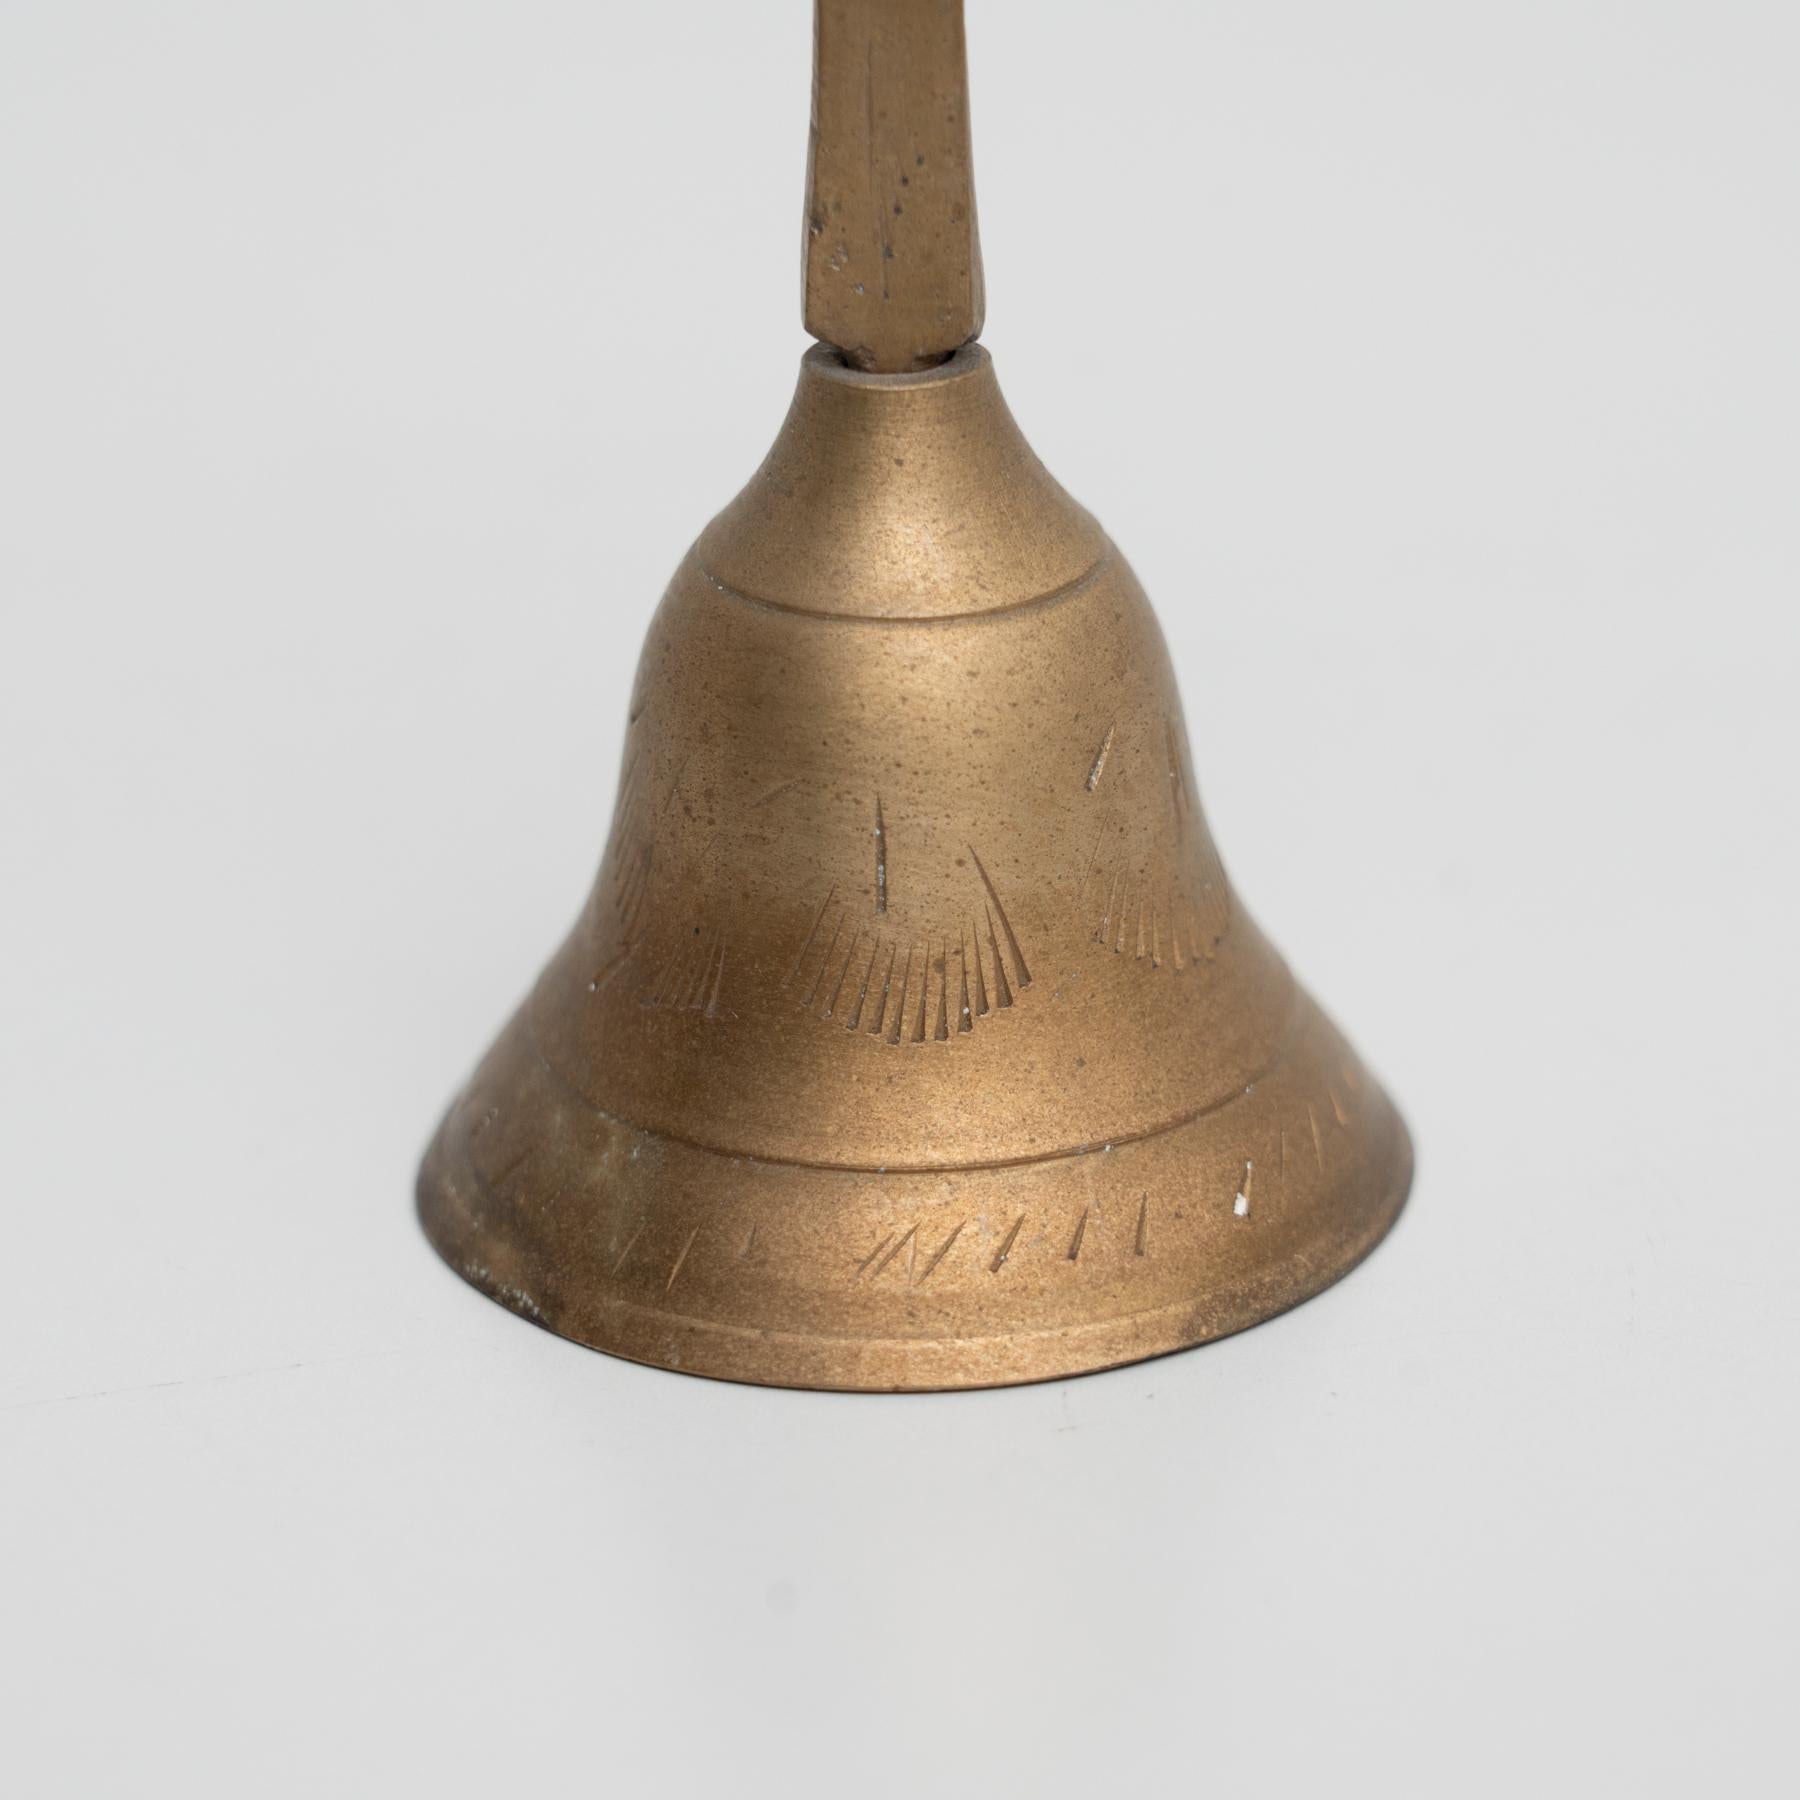 European Traditional Spanish Rustic Bronze Hand Bell Bottle Opener, circa 1950 For Sale